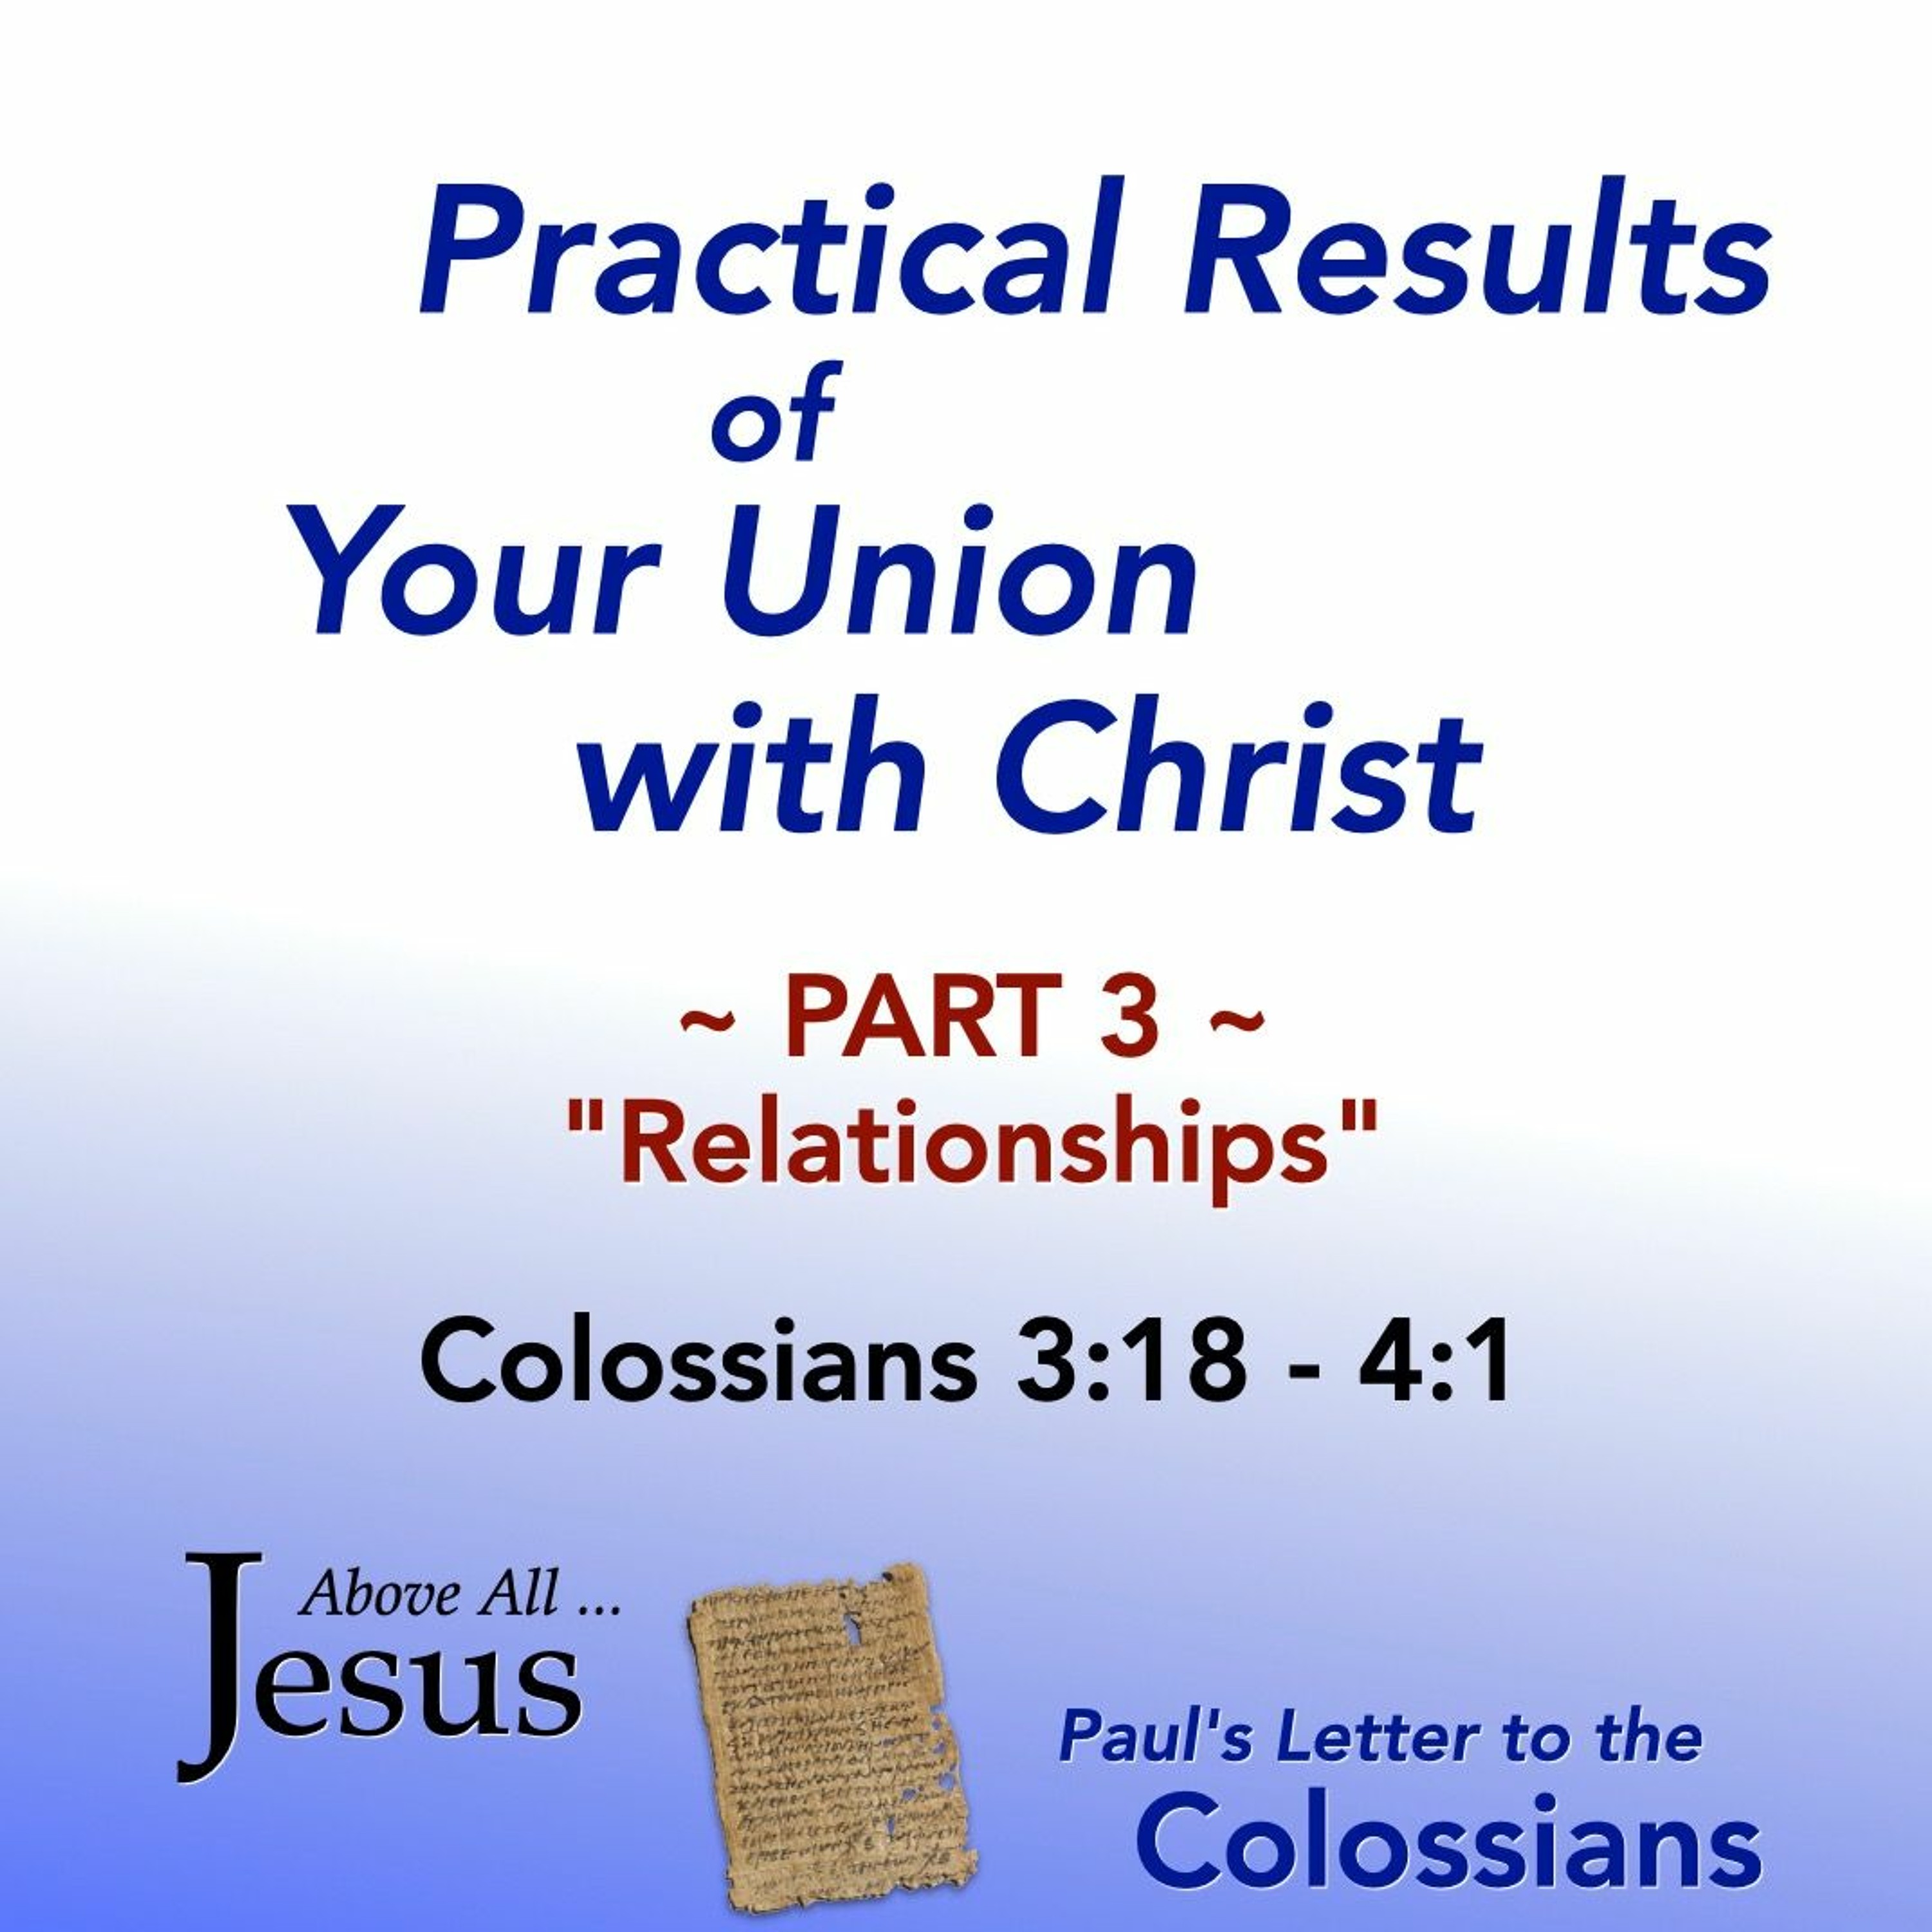 11-27-22 Practical Results Of Your Union With Christ - Part 3